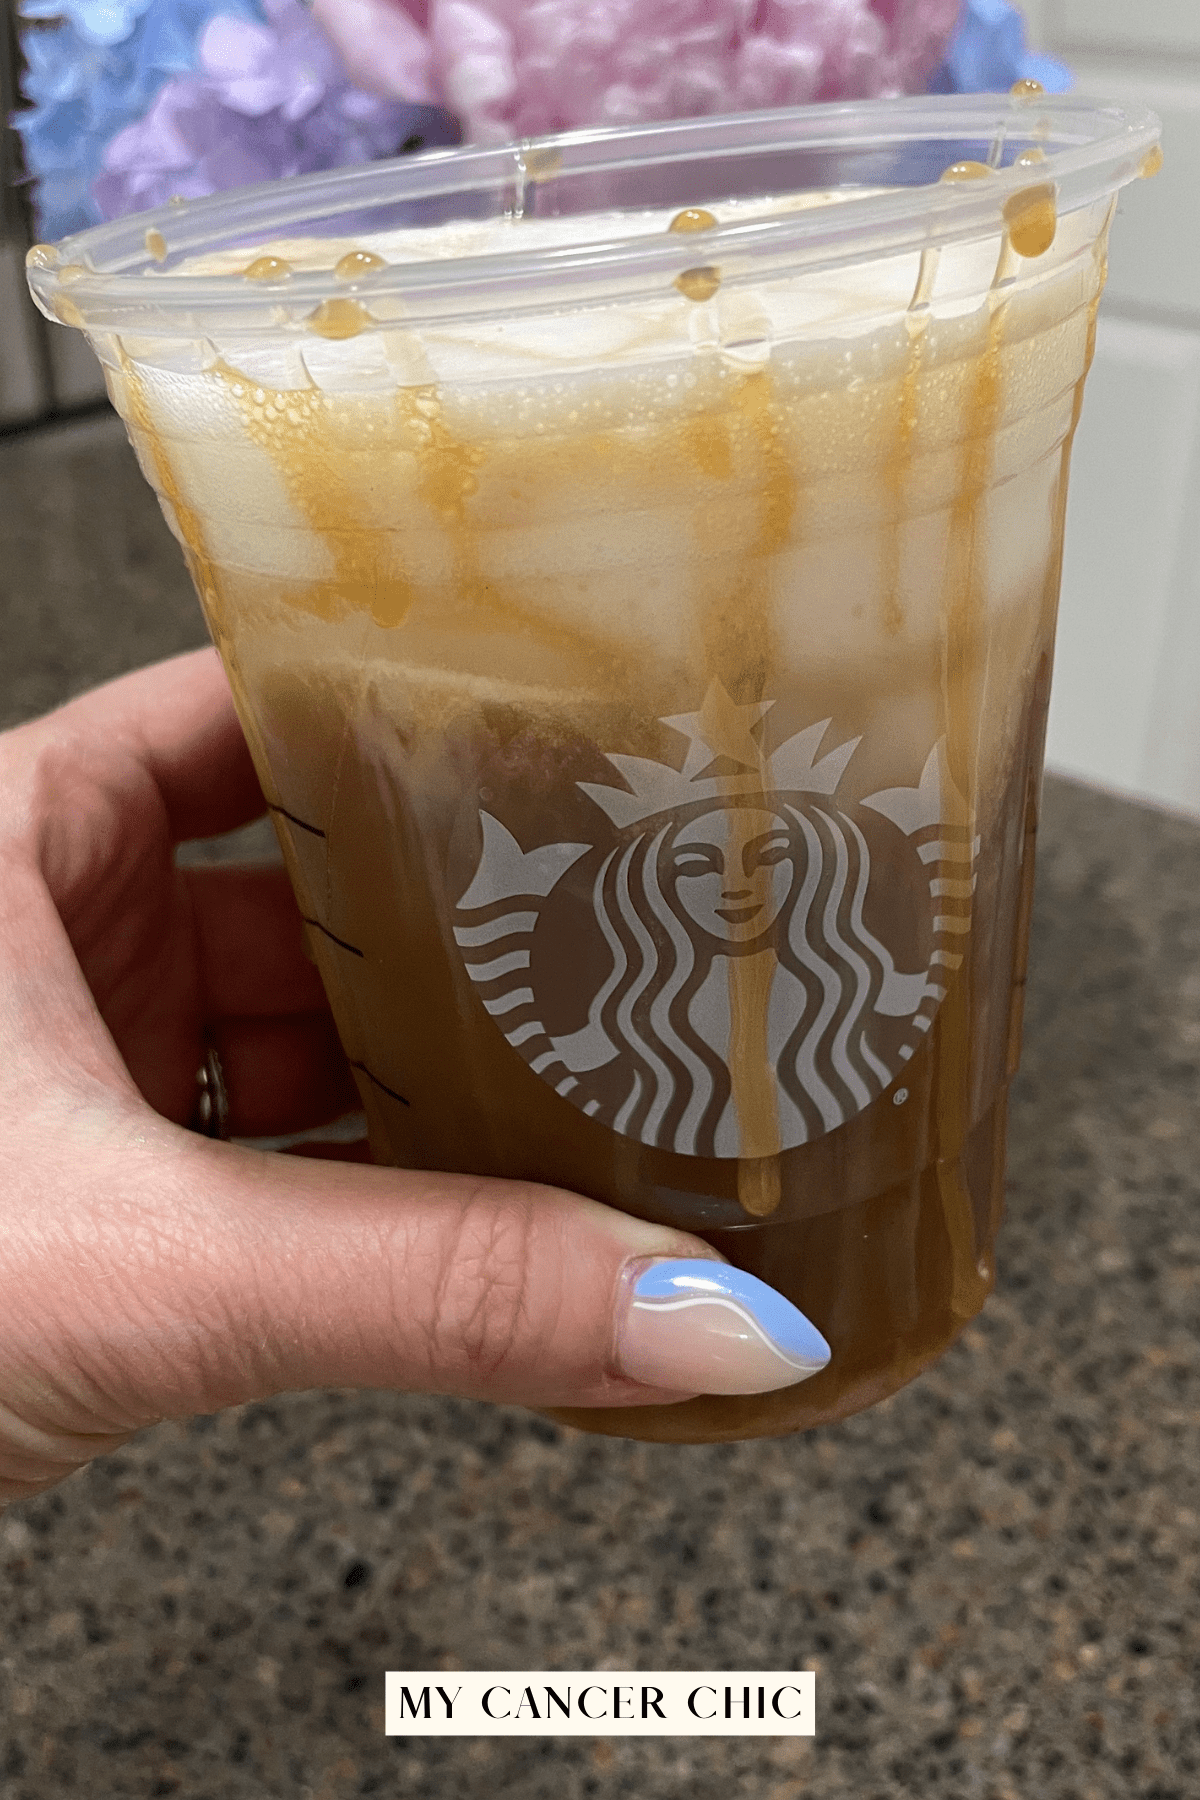 Dairy-free starbucks drinks with caramel drizzle